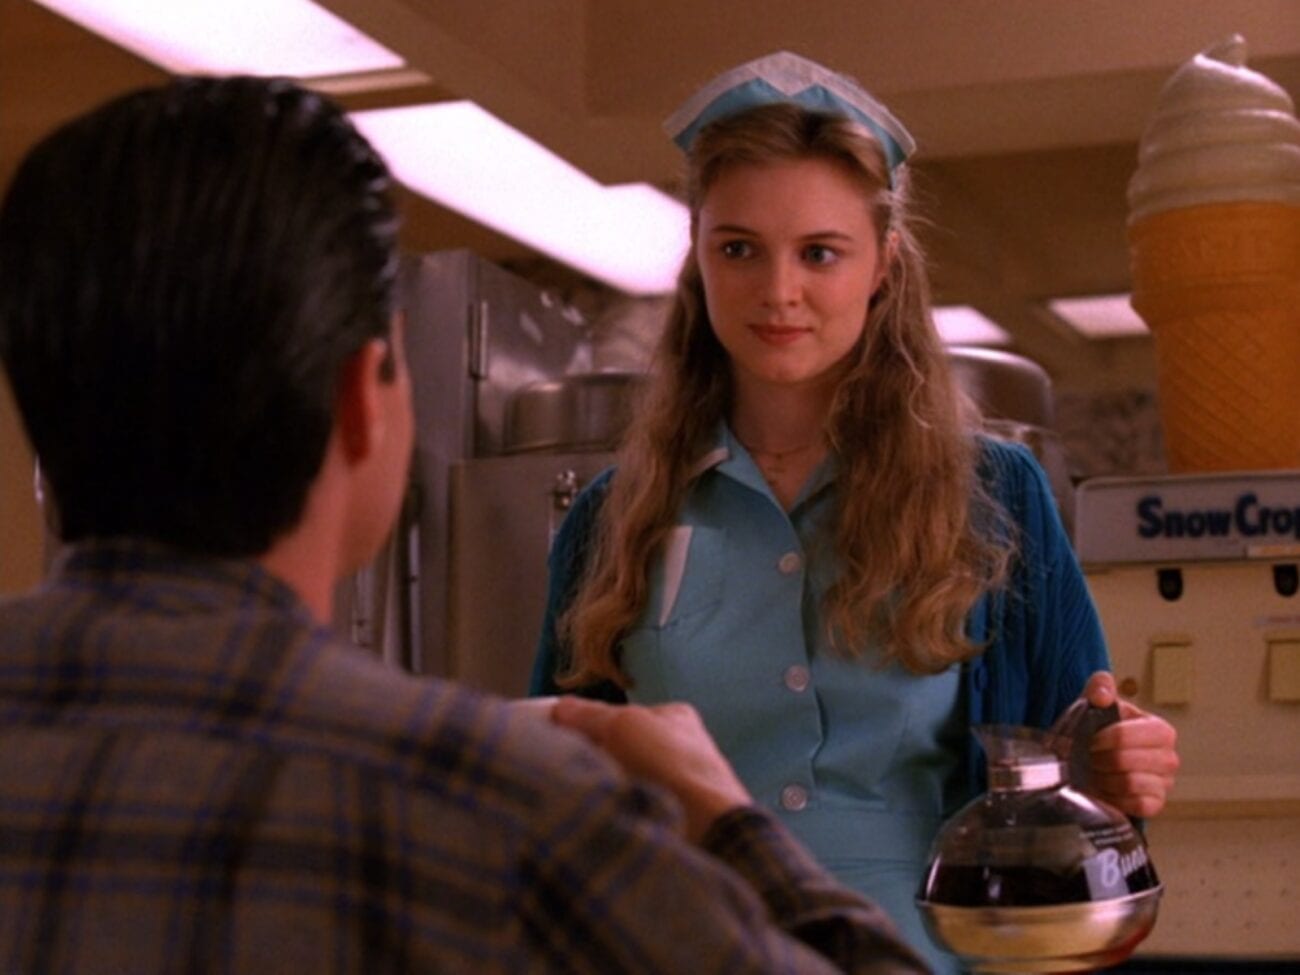 Annie in her waitress uniform stands before Cooper in plaid, holding a coffee pot 